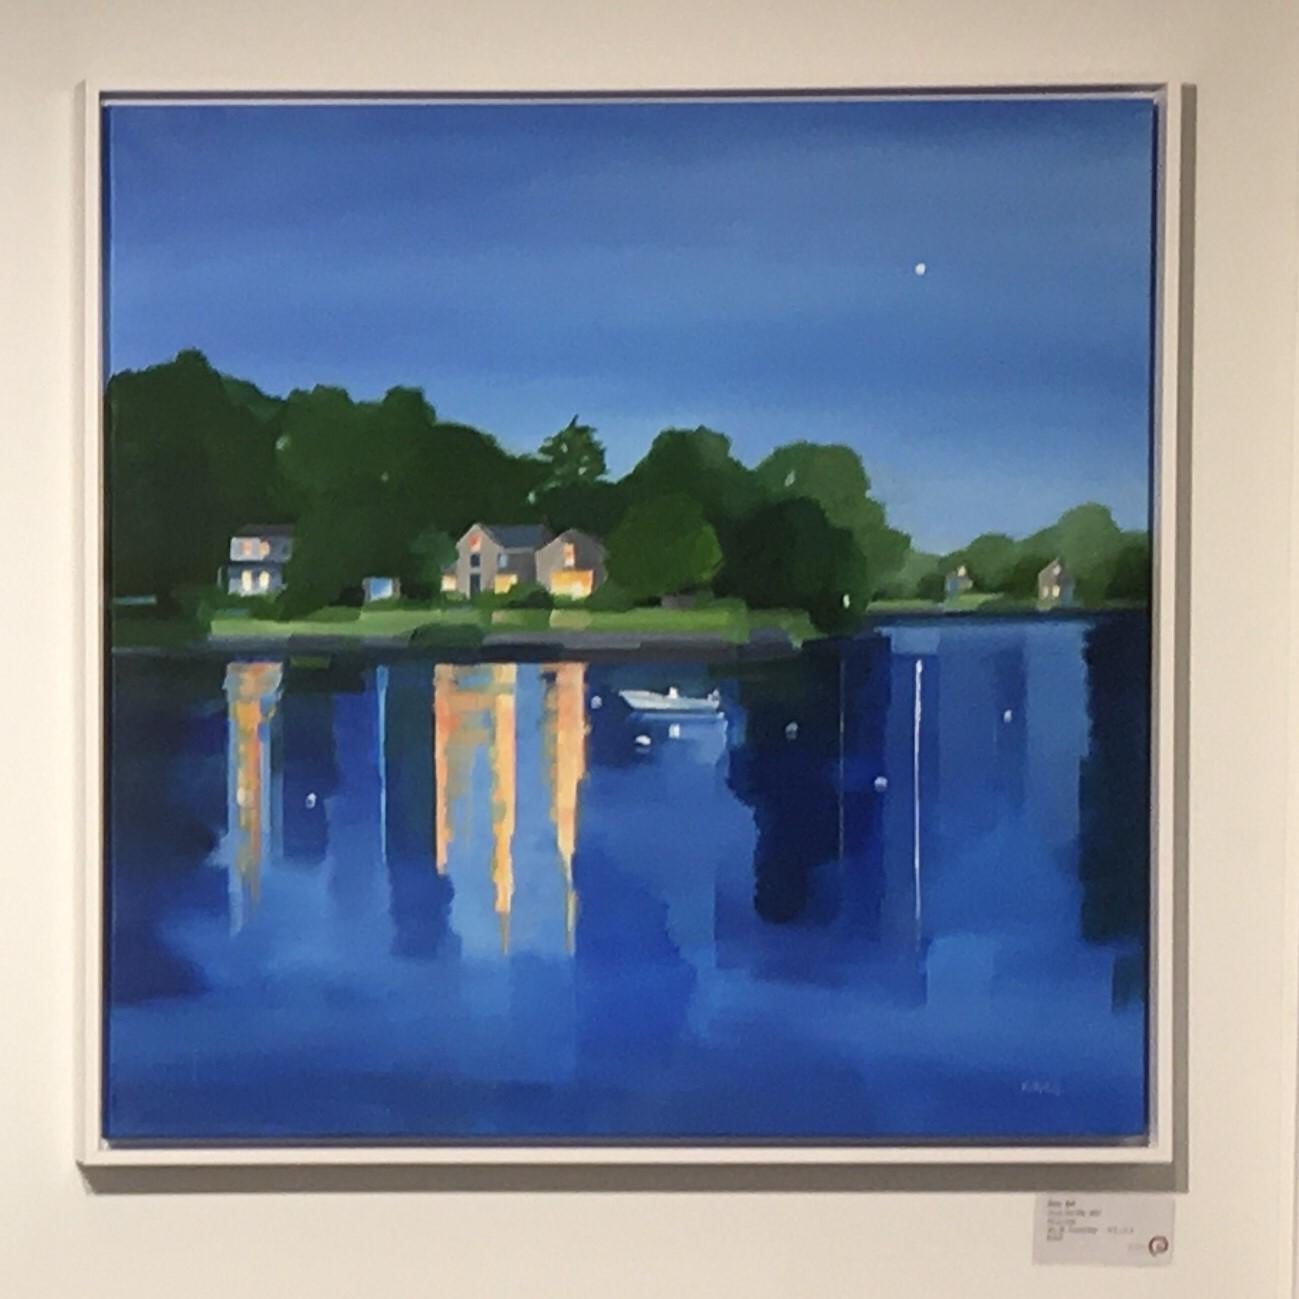 Across Five Mile, Waterscape, Reflections, Blue, Water, Landscape, painting - Painting by Betty Ball